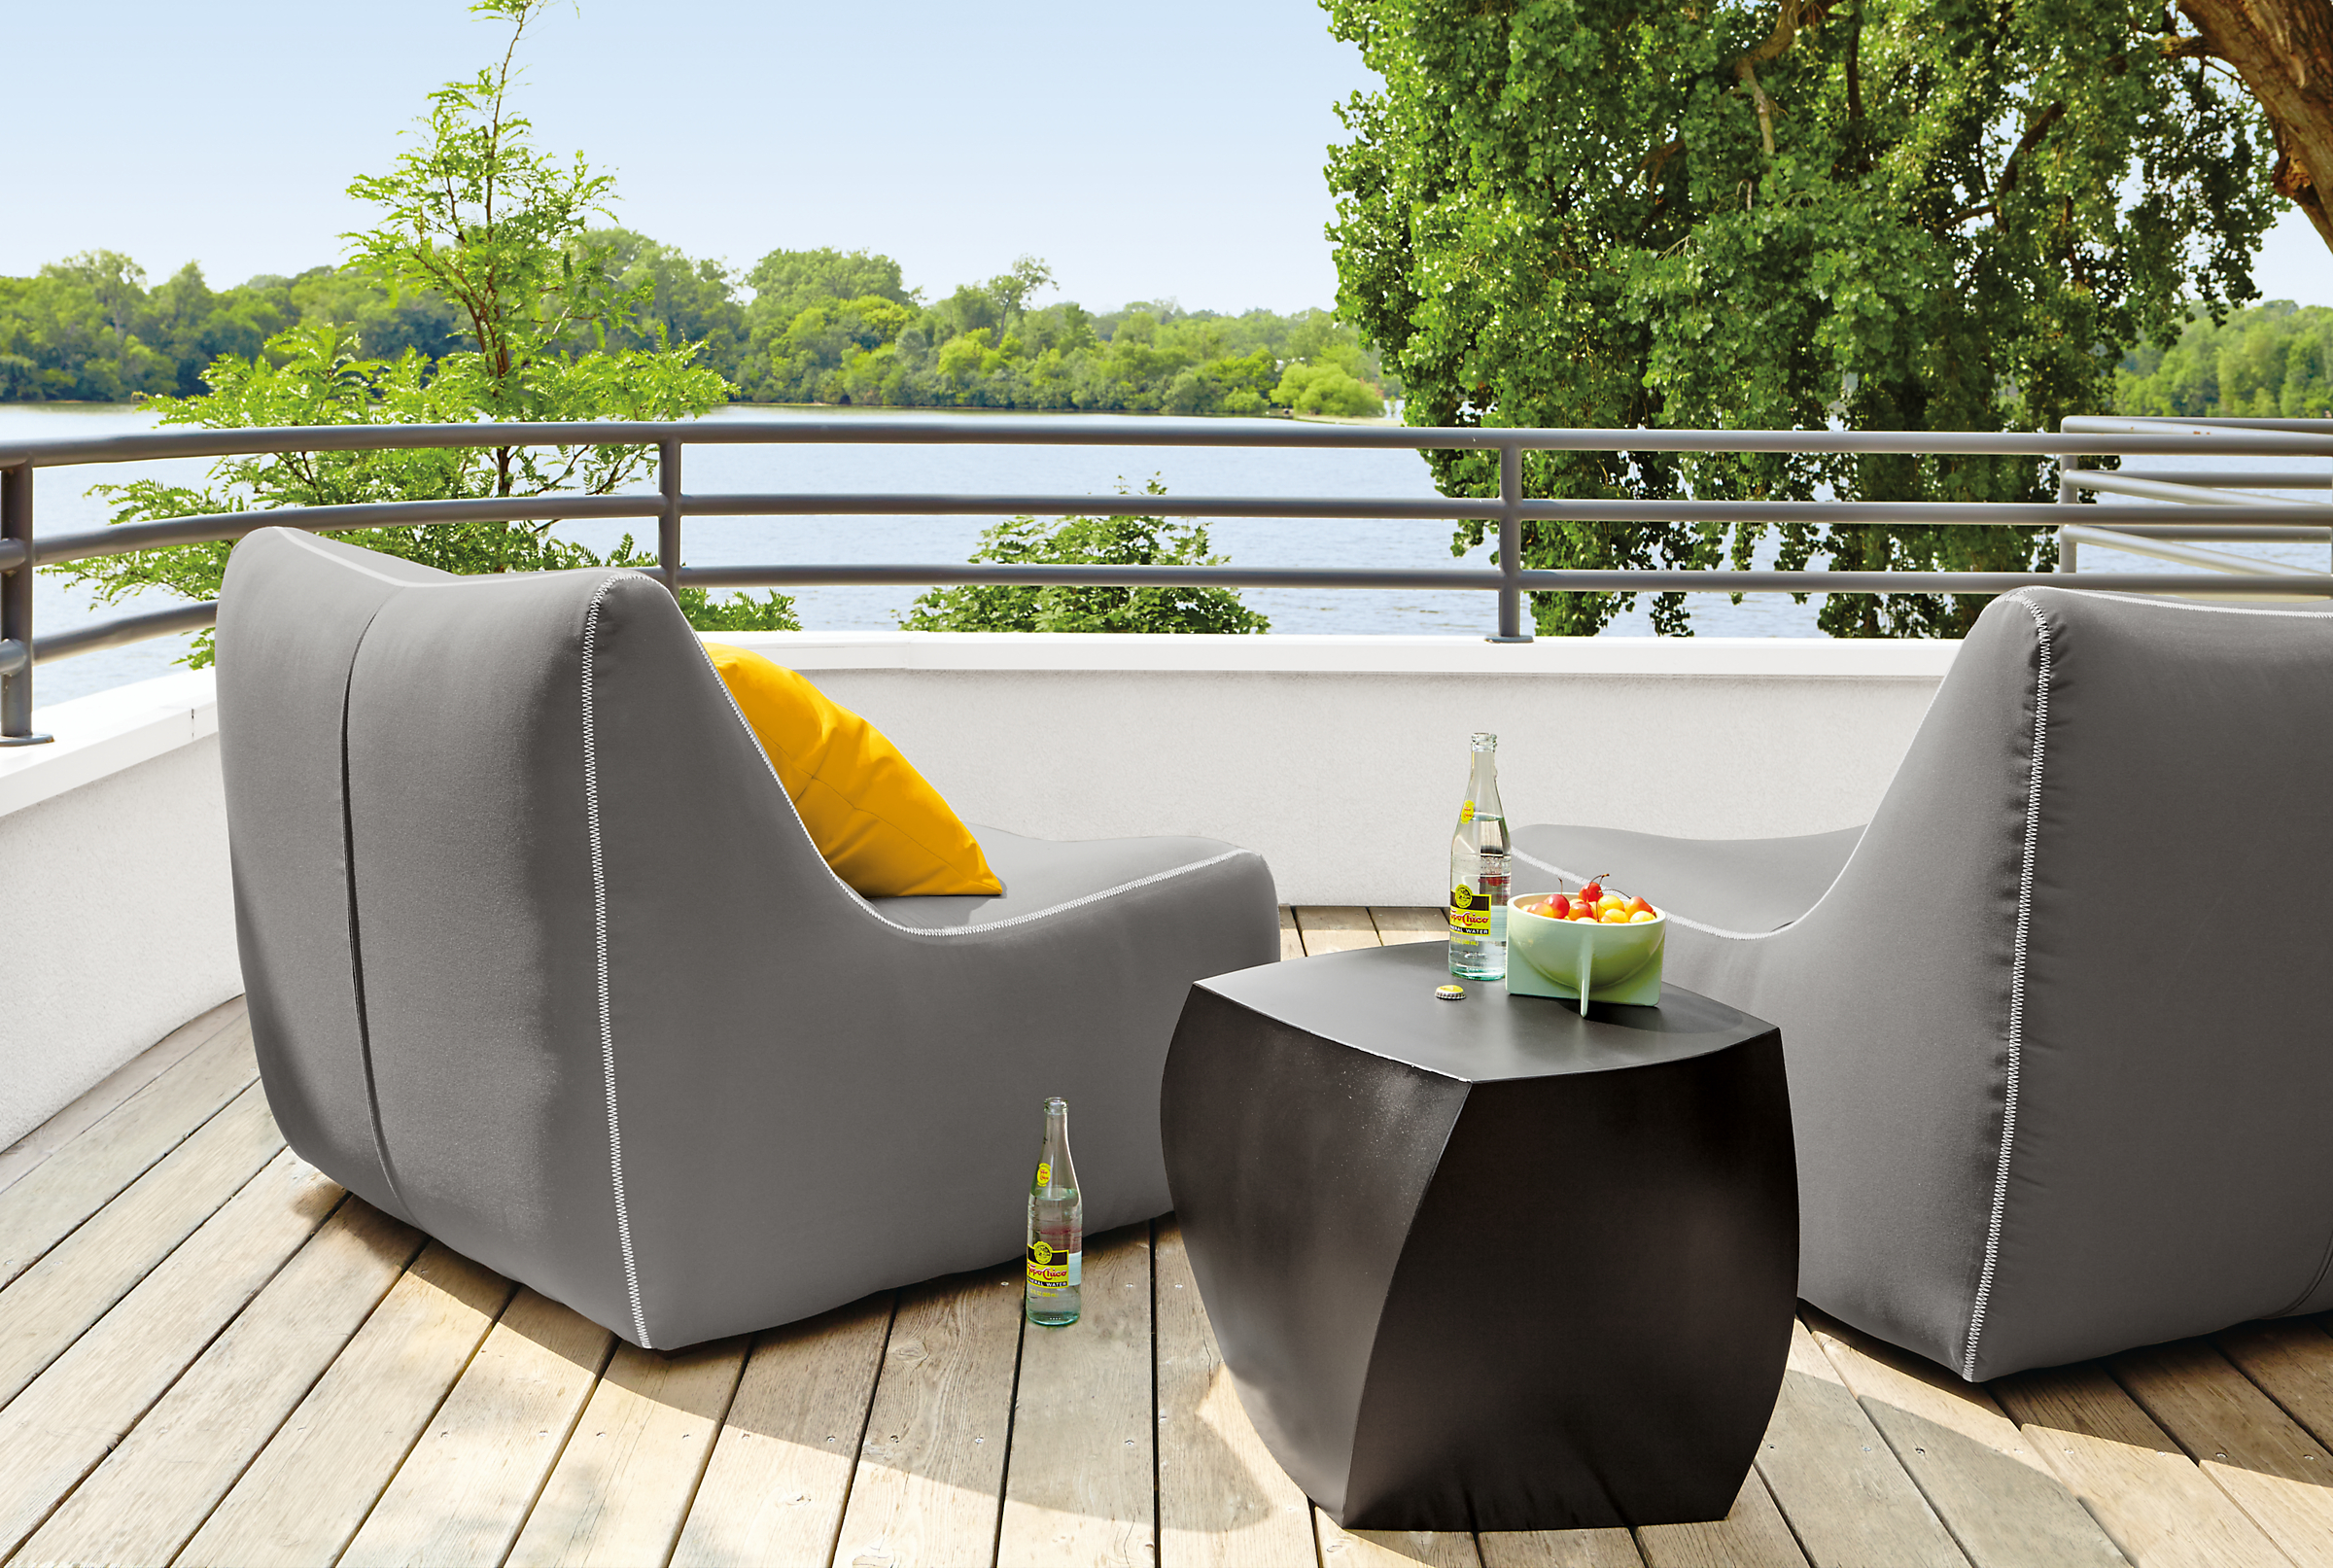 Outdoor balcony with 2 Maya Armless Chair in Sunbrella Canvas Charcoal and a Gehry left twist Cube in black.